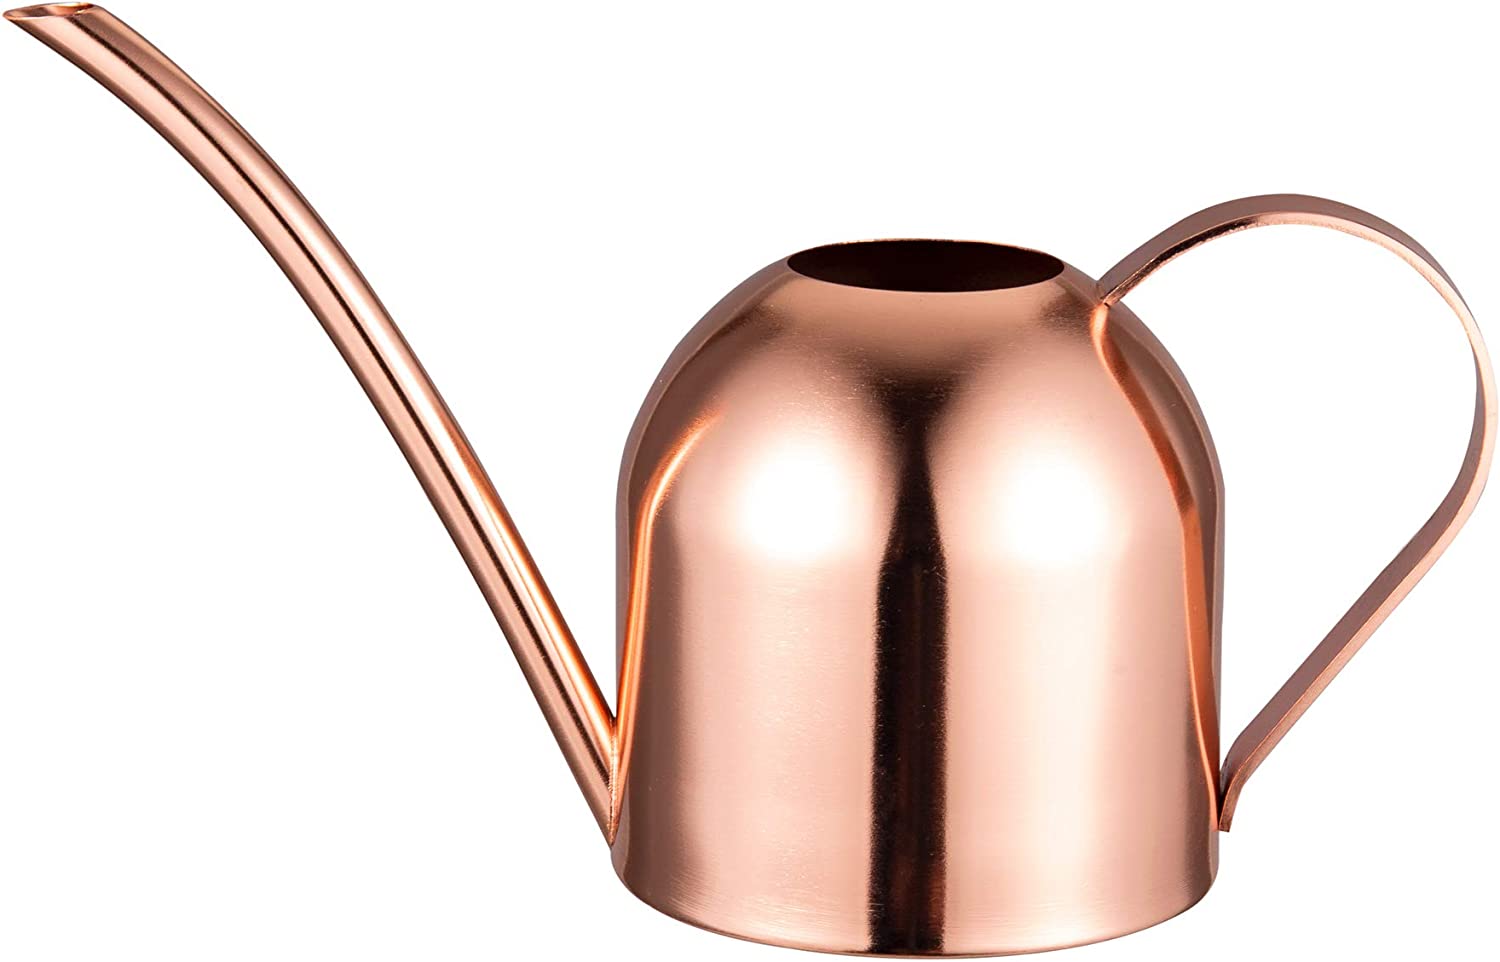 IMEEA Mirror Finish Stainless Steel Watering Can